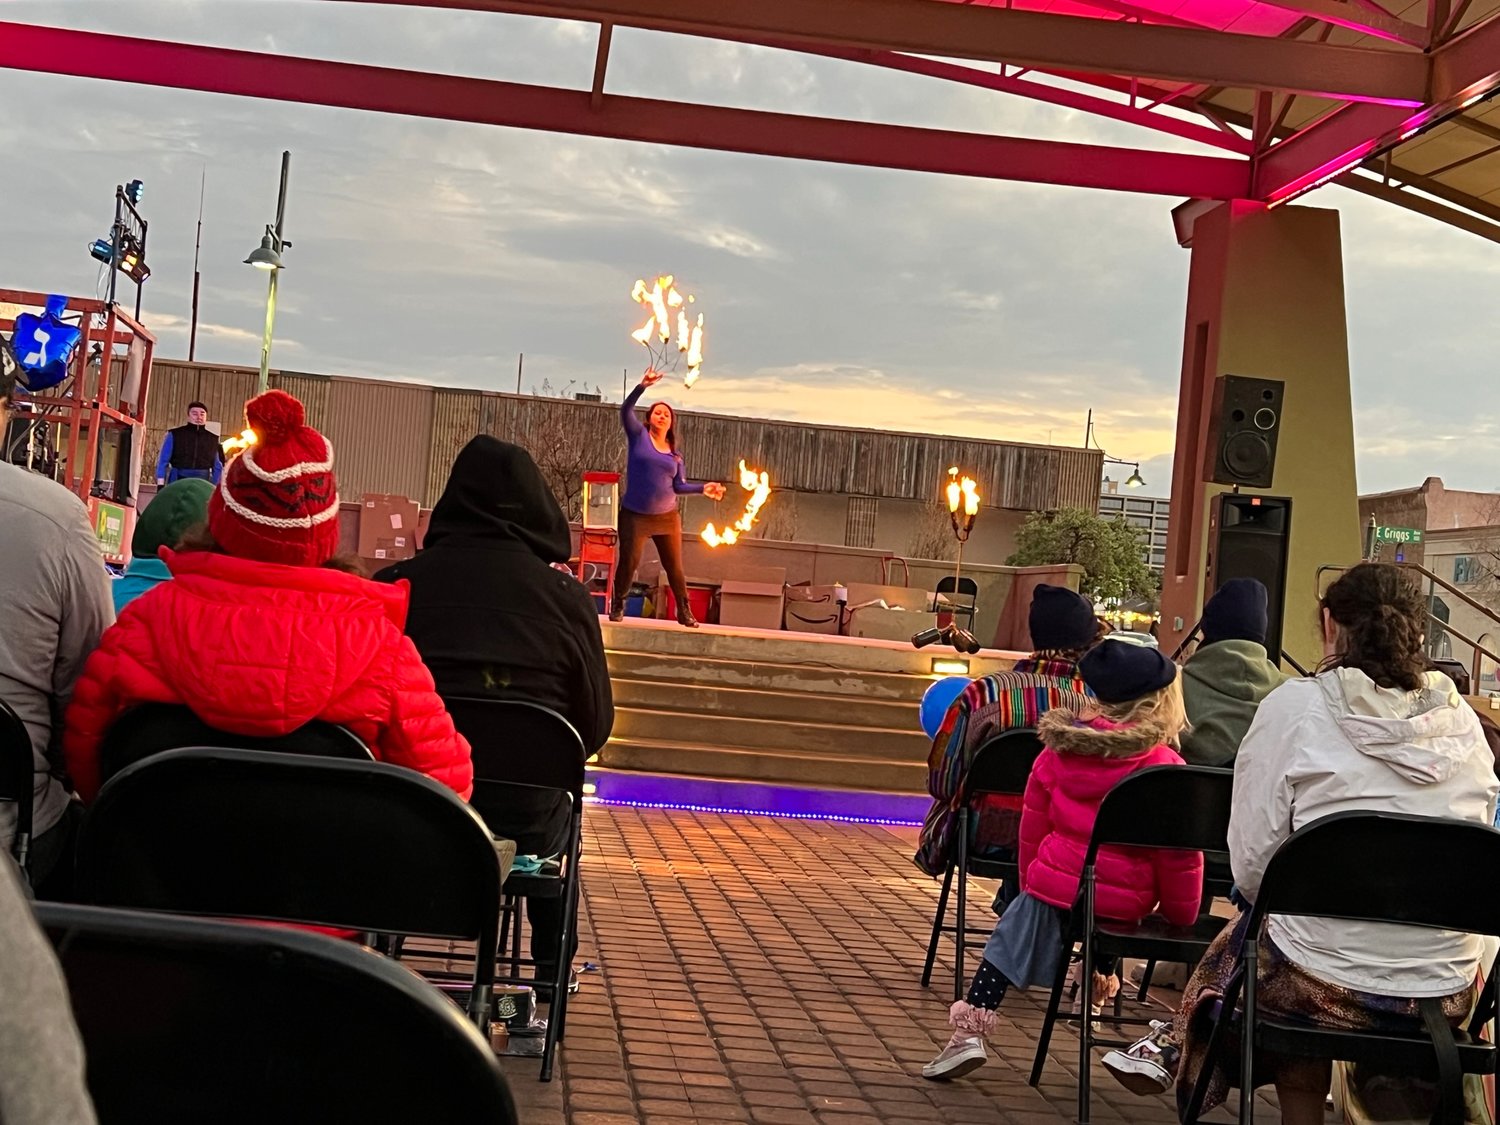 Fire dancers with ODD LAB provided a finalé highlight (literaly) with performances of flaming batons, swords and whips during MEGA Chanukah at Downtown Plaza de Las Cruces events Sunday, Dec. 19. Dragoncharmer weaves some cleaver dancing flames for the audience.